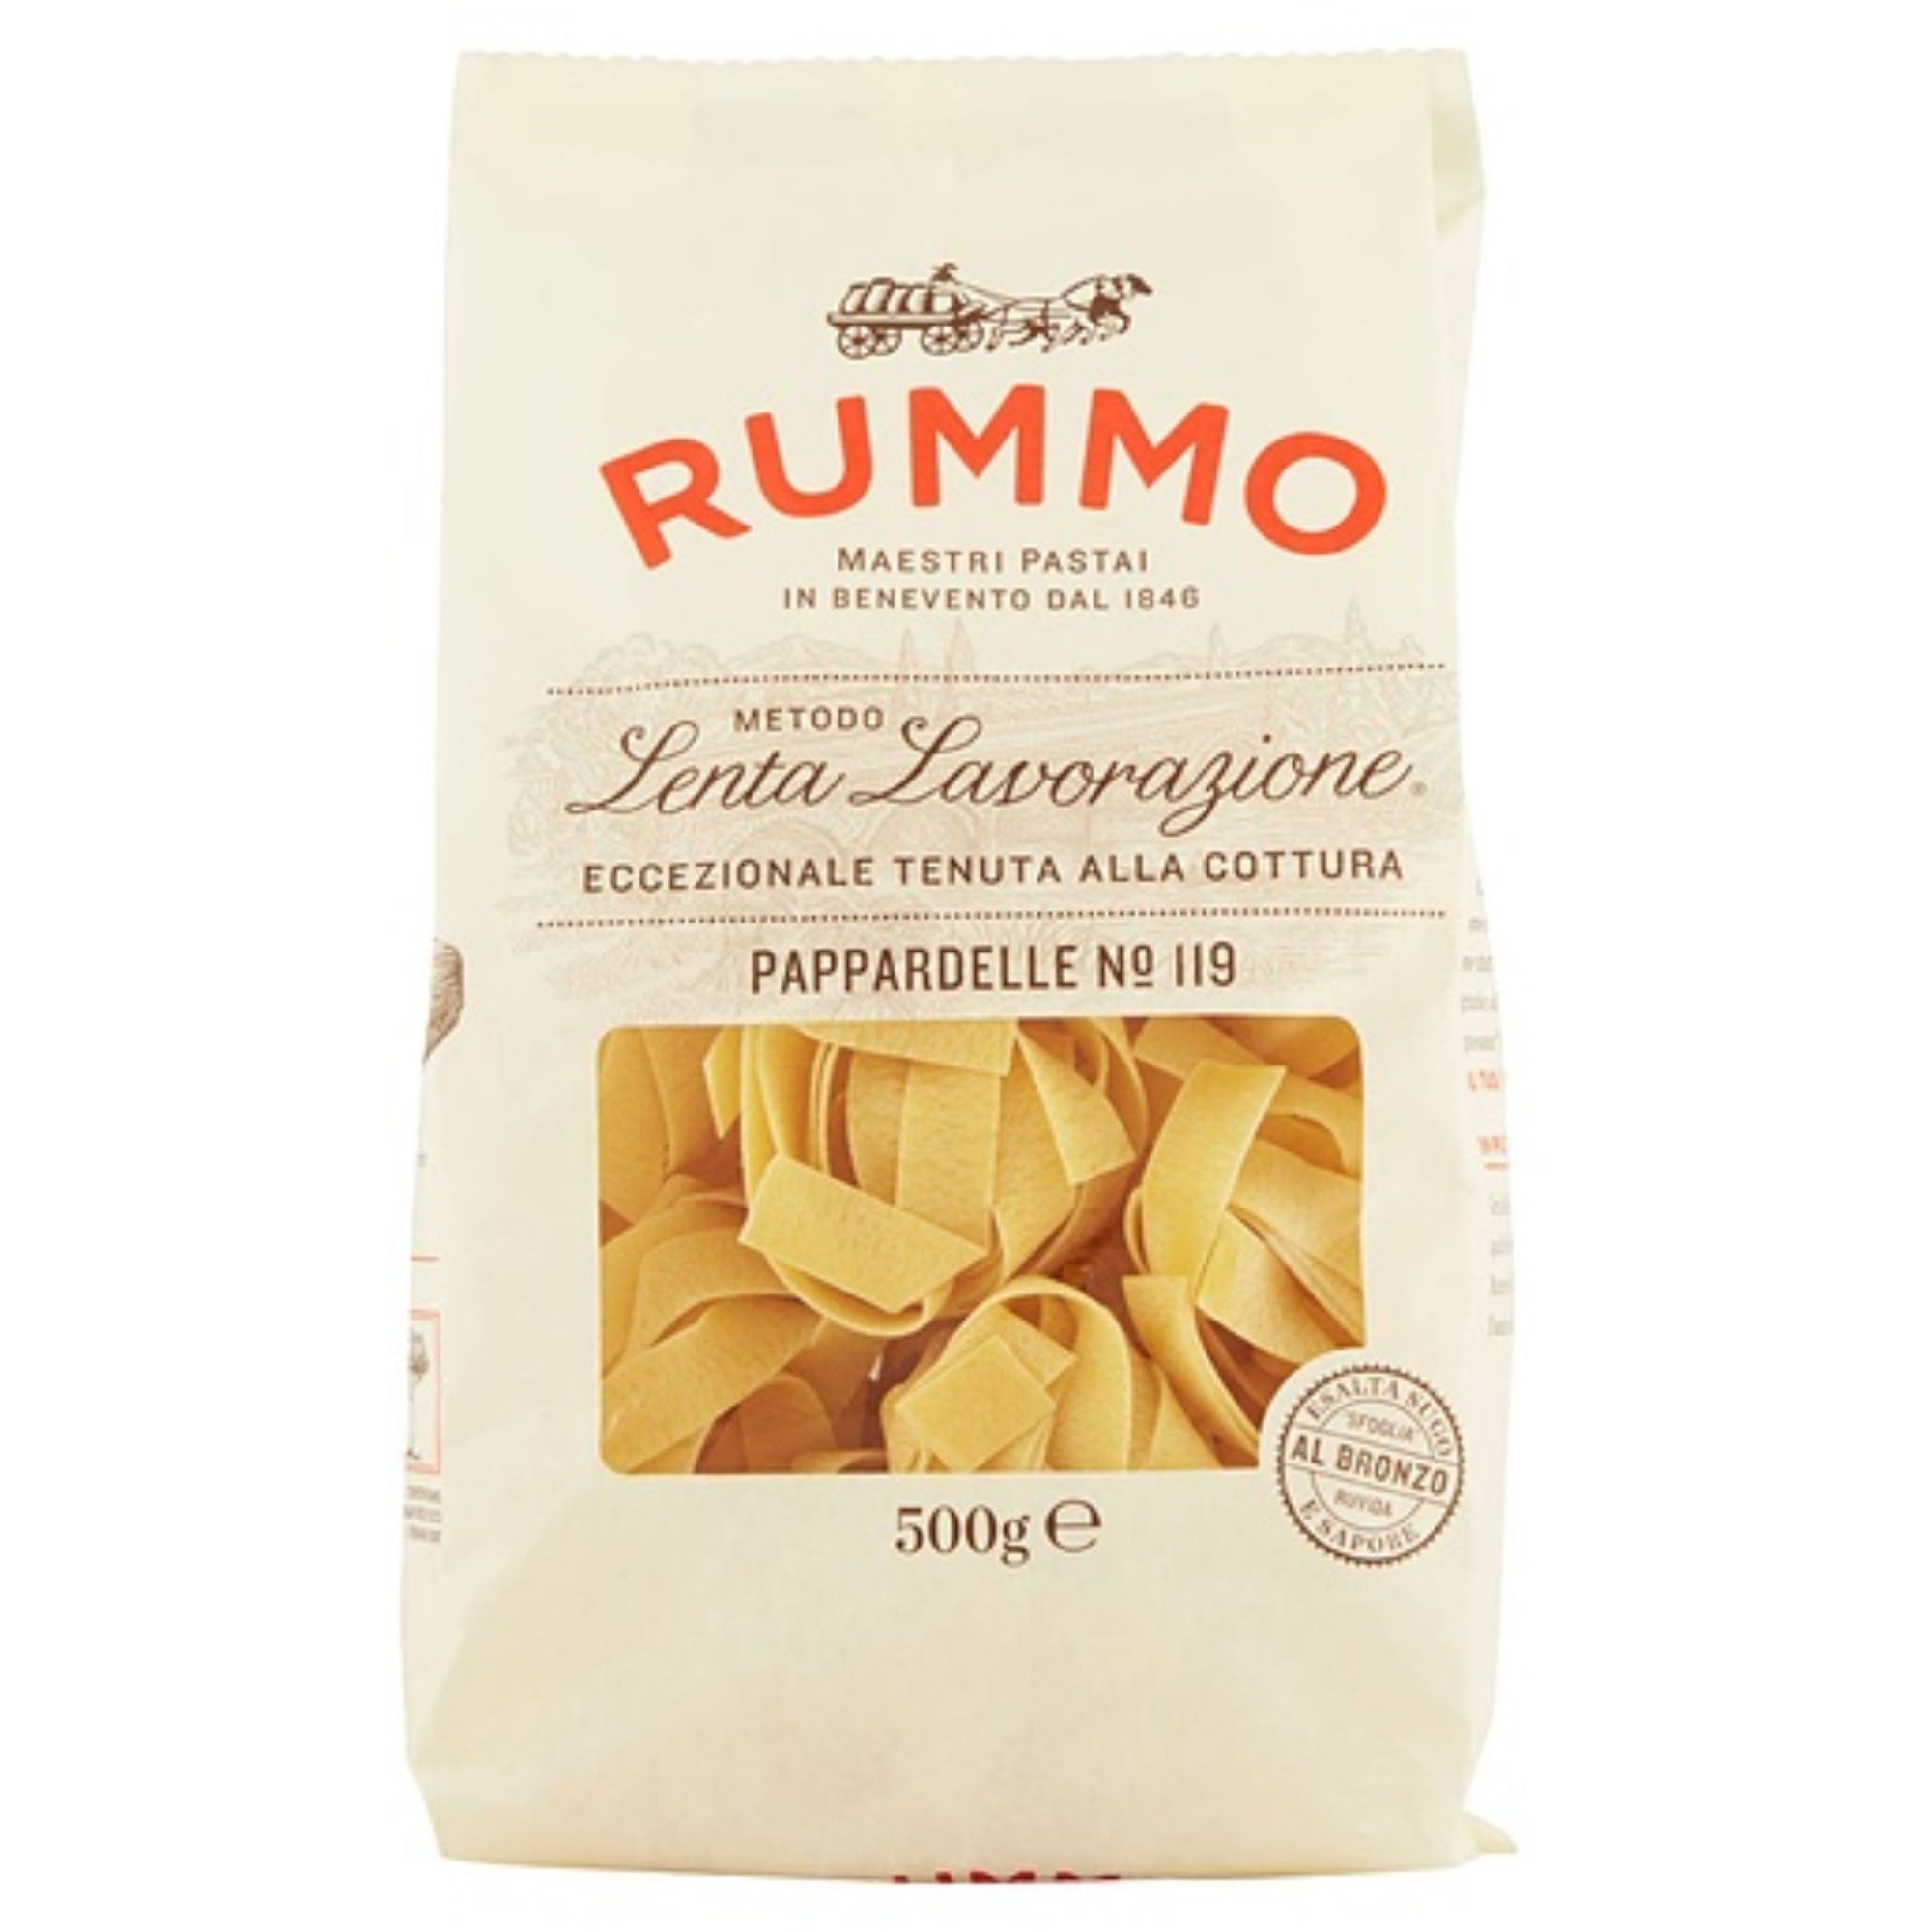 Pappardelle 'Rummo' 500g